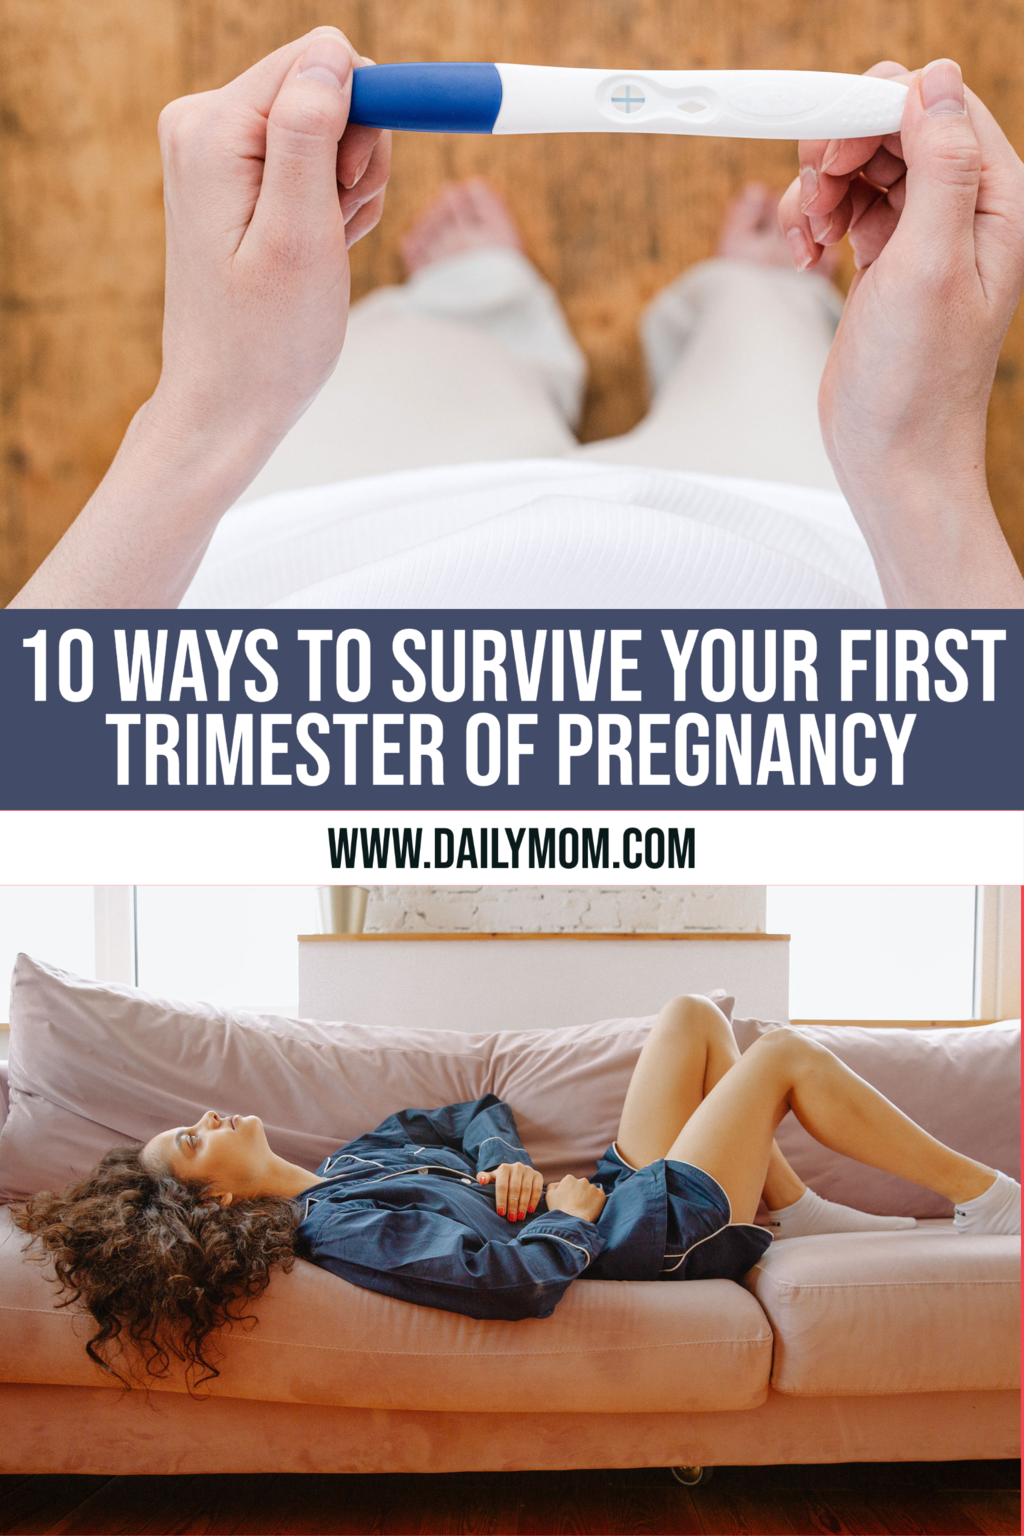 FIrst Trimester Of Pregnancy: 10 Tips To Survive » Read More